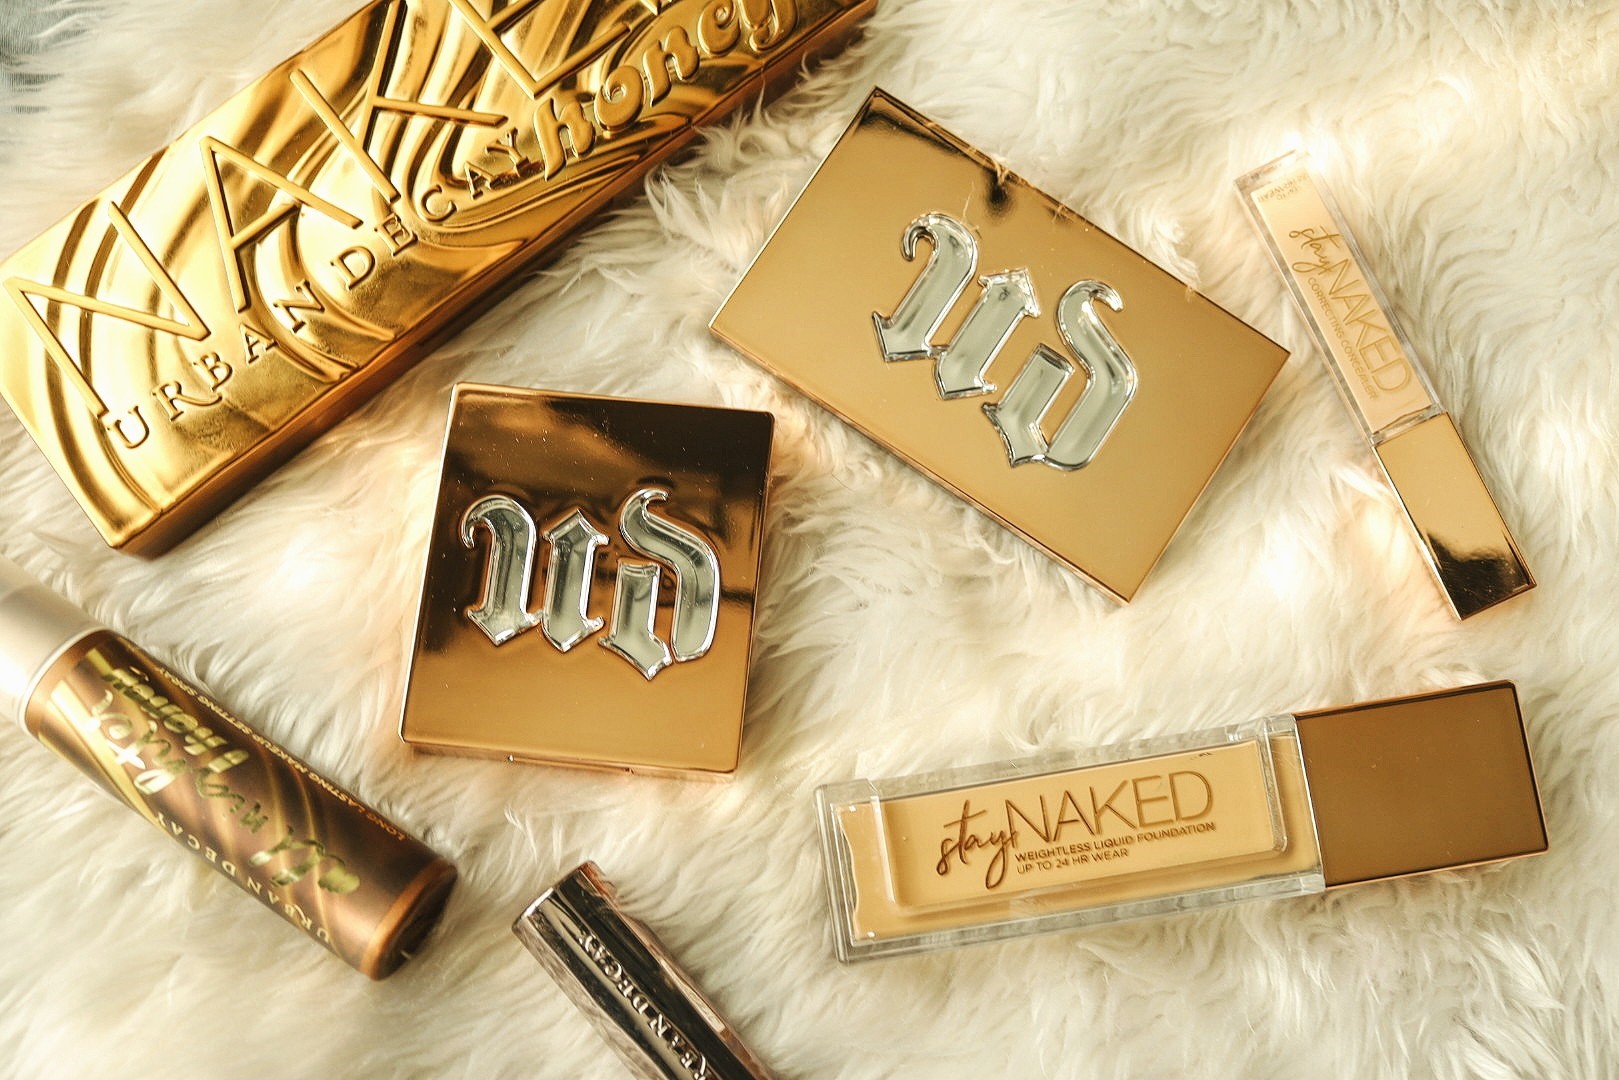 Urban decay Stay Naked The Fix Powder Foundation